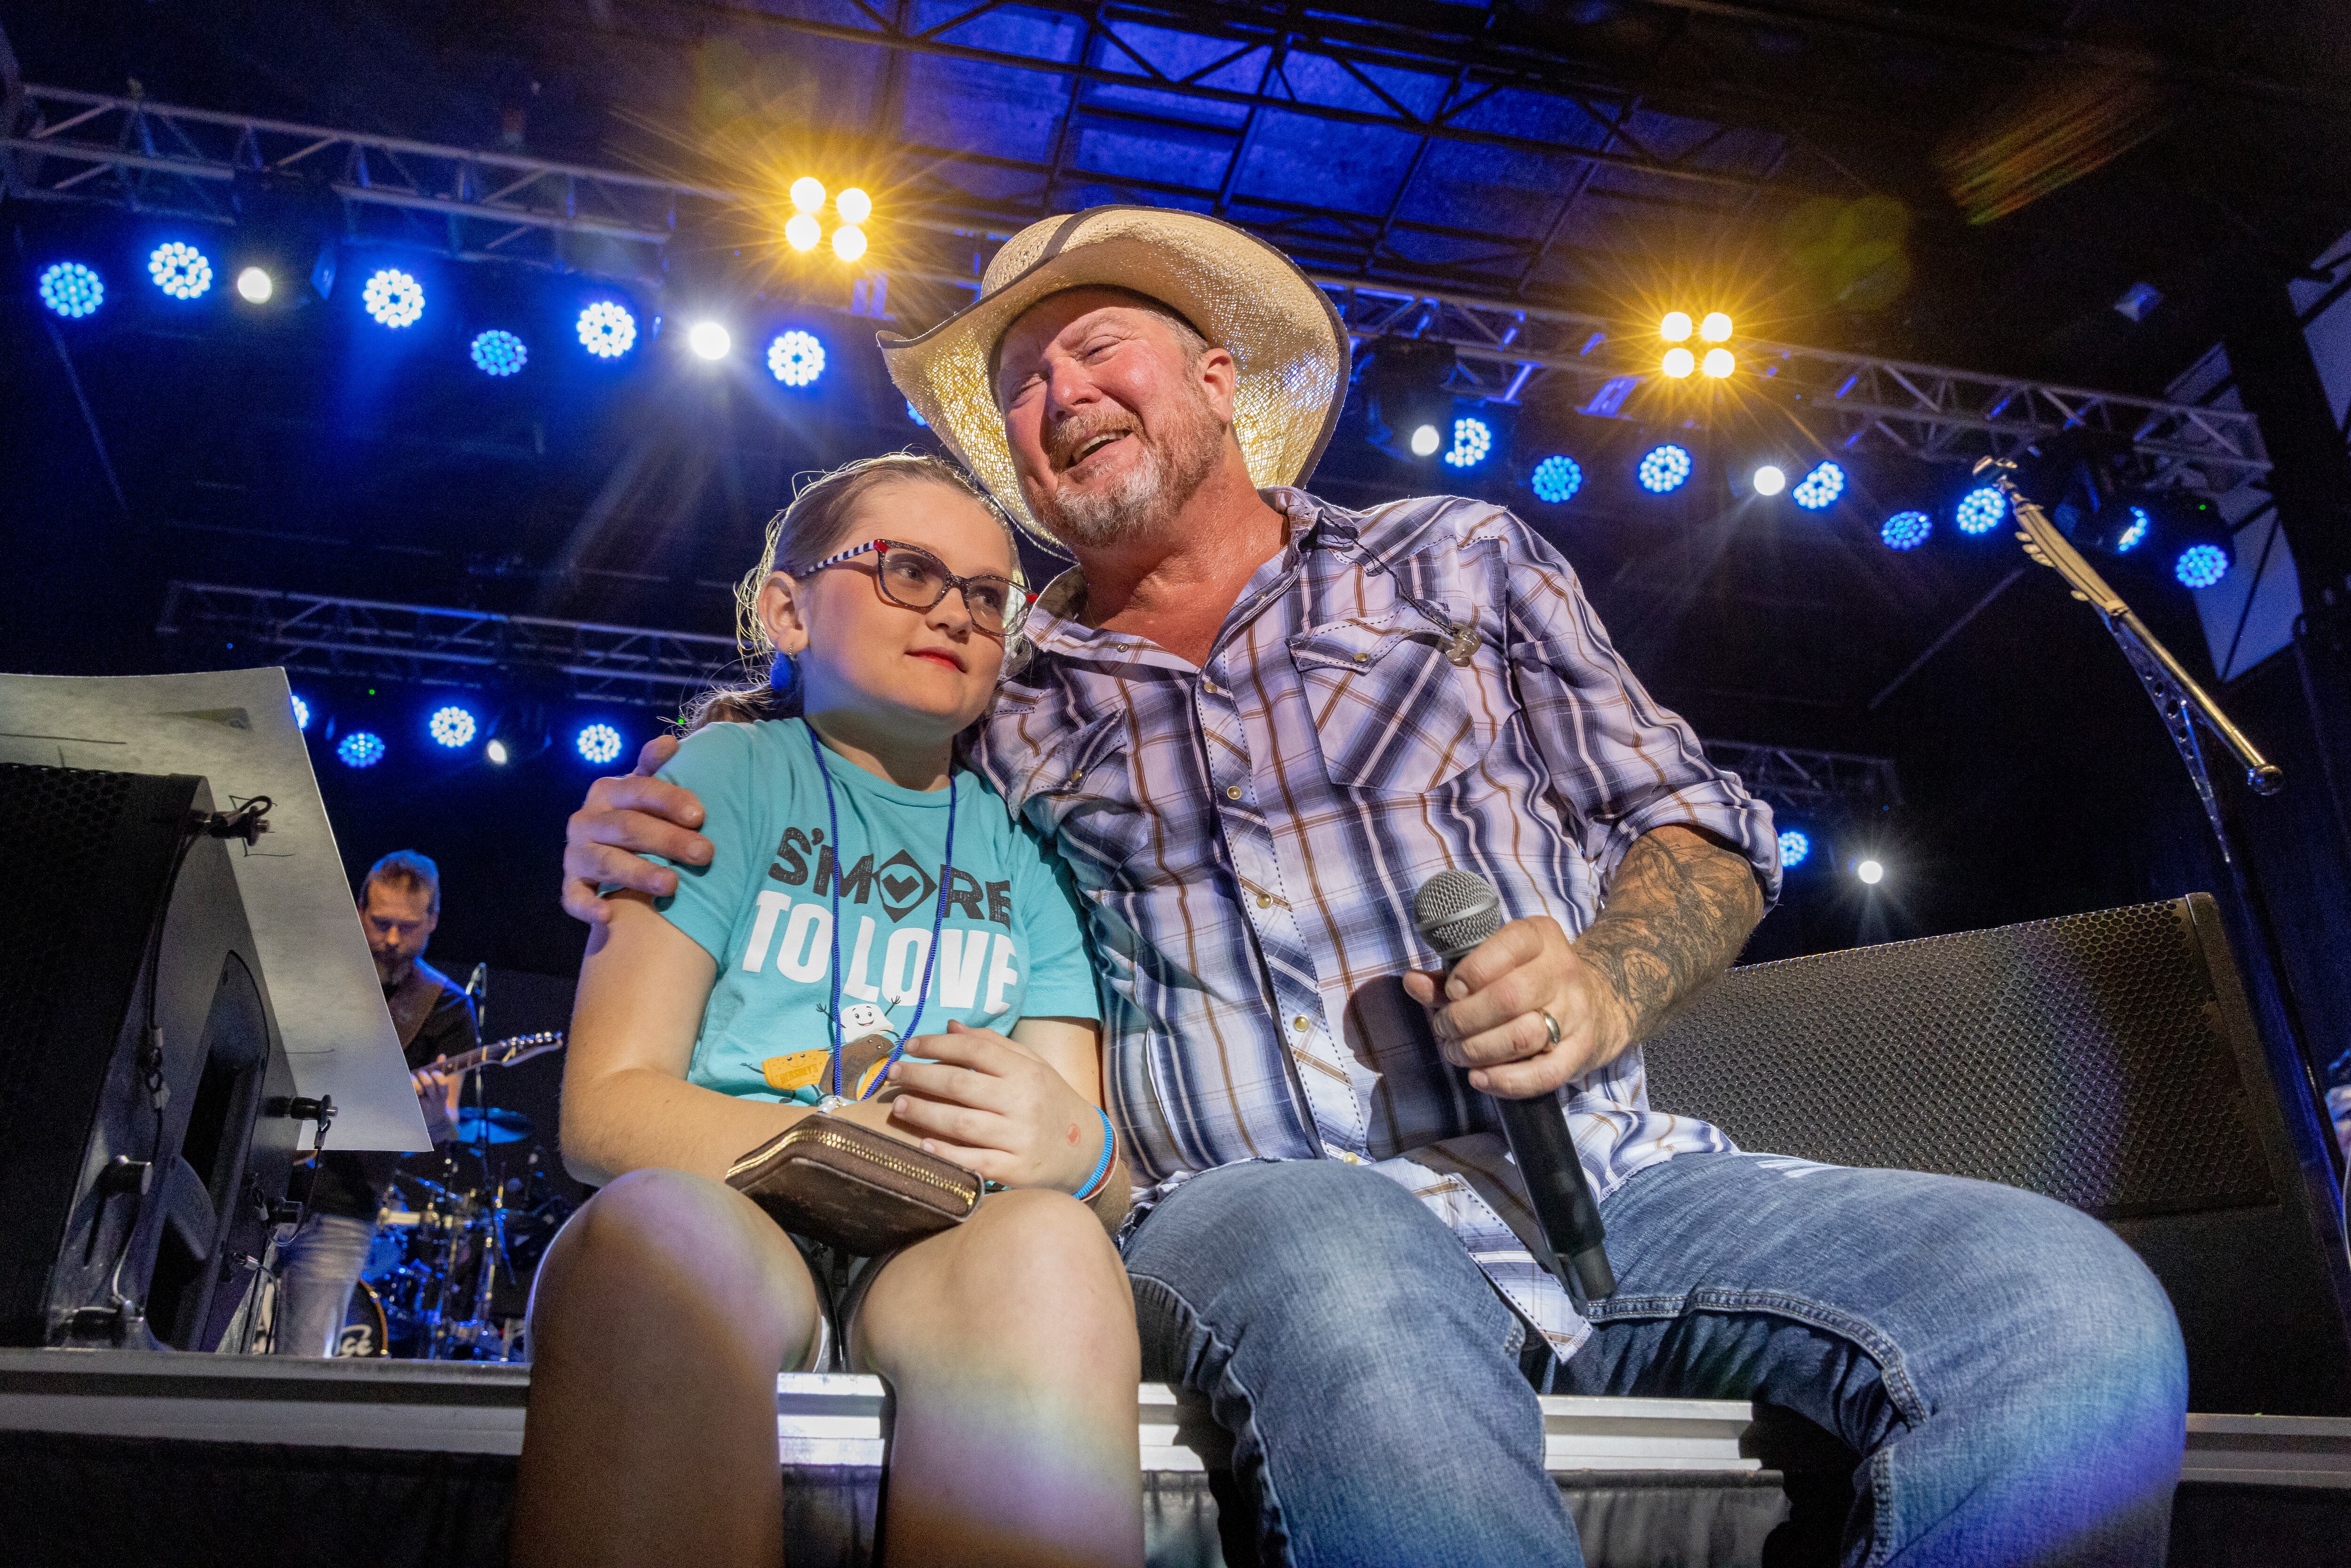 Brooklynn Graham joins Tracy Lawrence on stage Friday, Aug. 4, 2023, for a performance of the song "Texas Tornado" during Streator Fest at Northpoint Plaza.